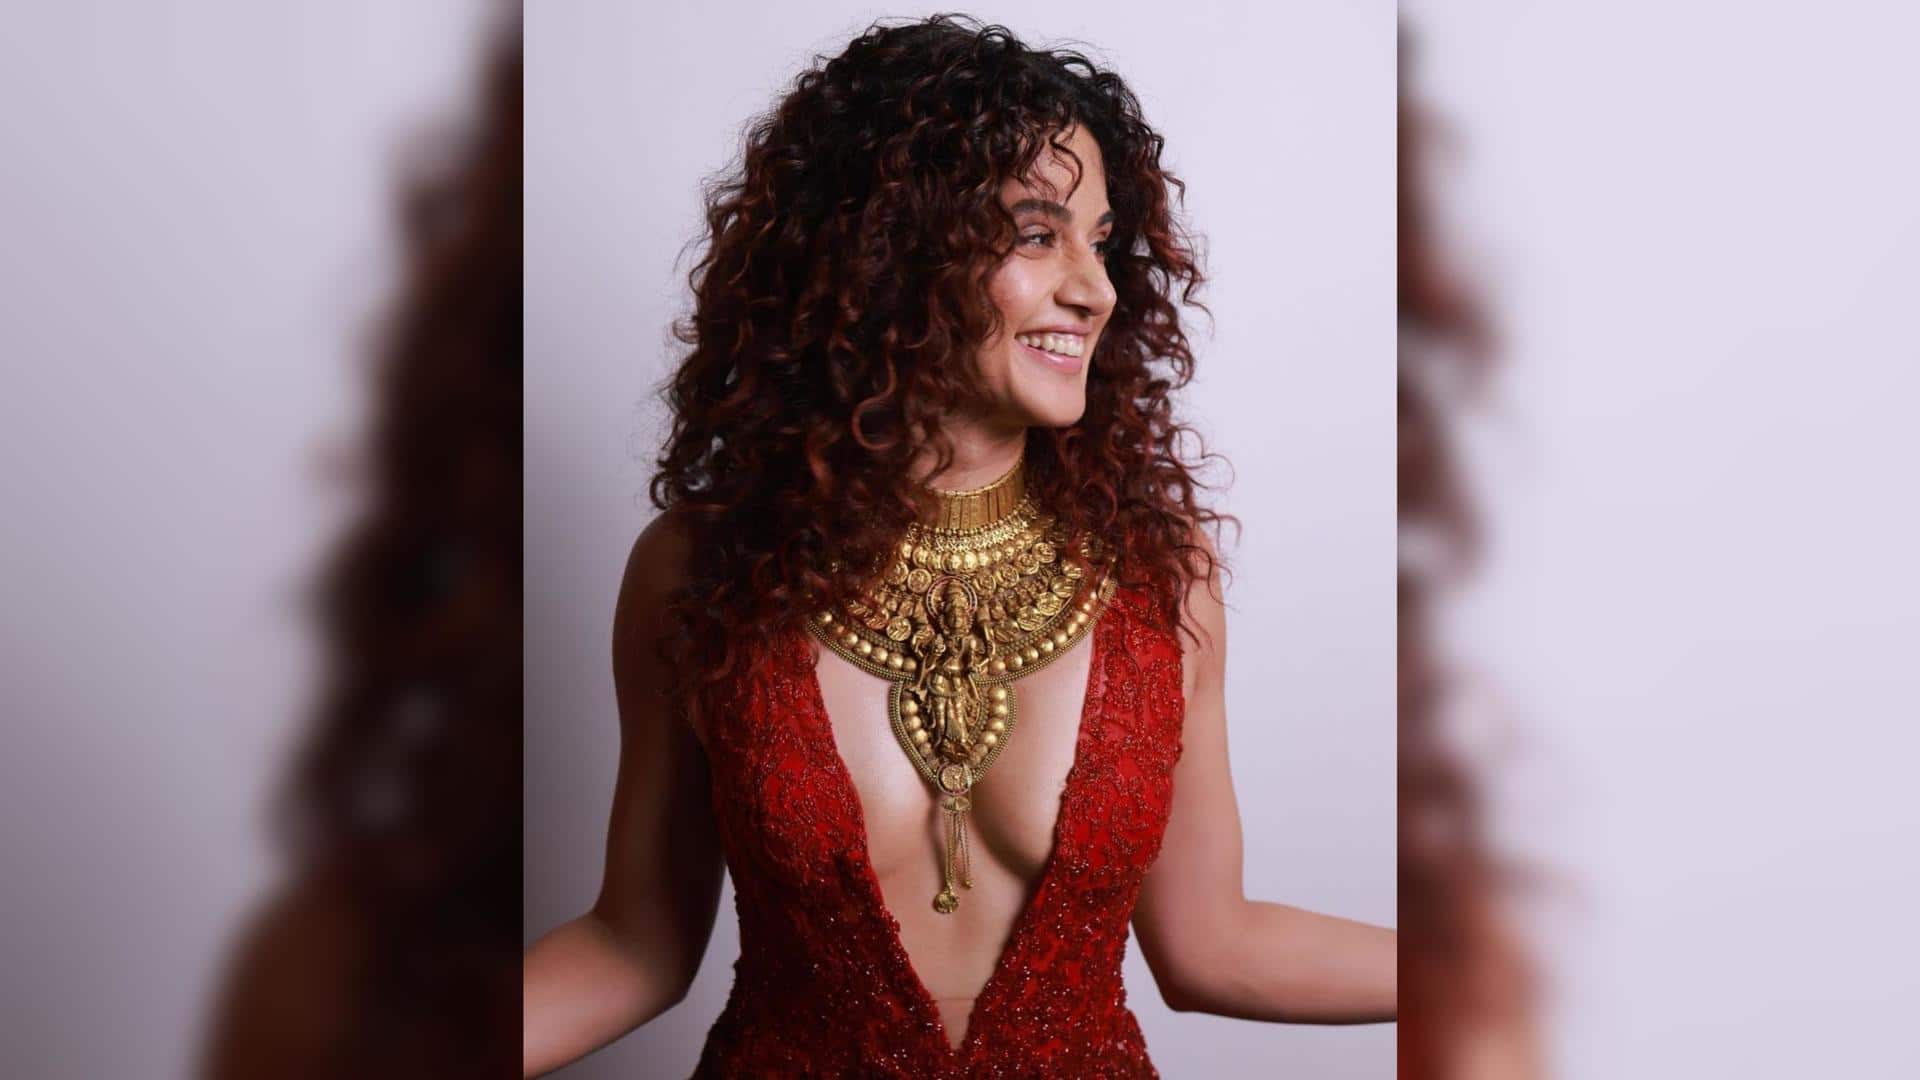 Actor Taapsee Pannu trolled on Instagram for 'disrespecting' Hindu goddess 